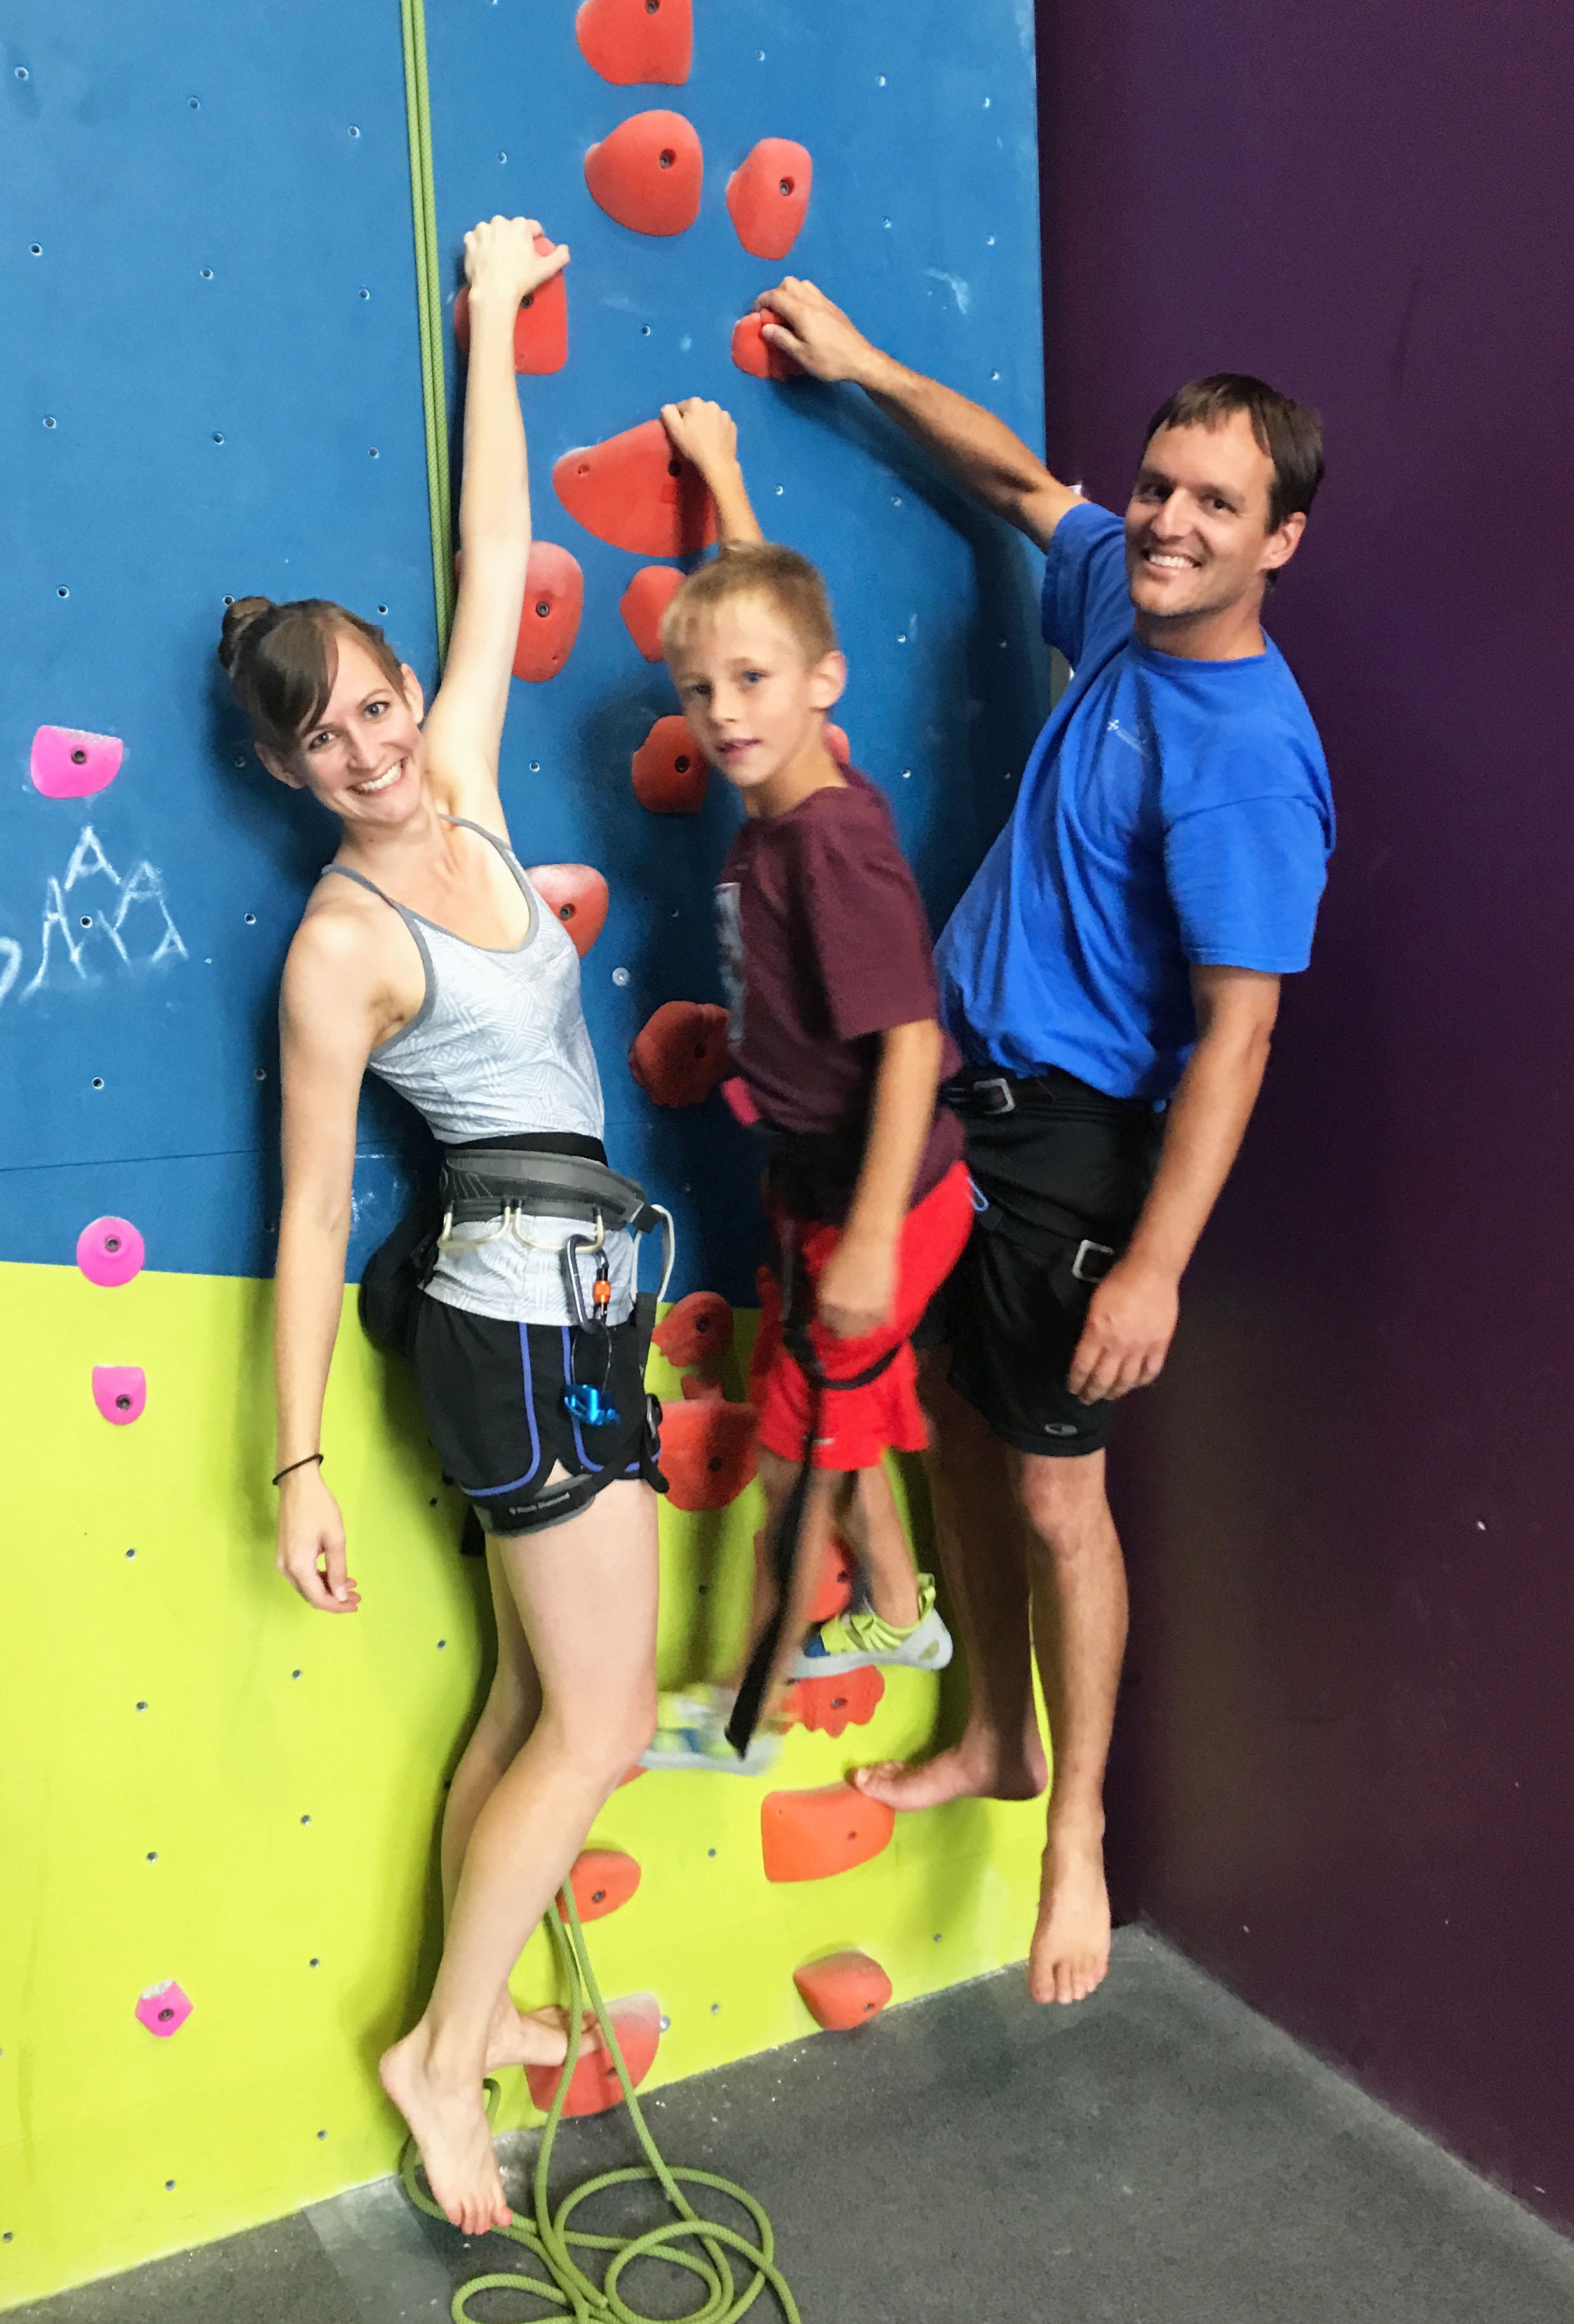 Rock climbing with my favorite guys &lt;3